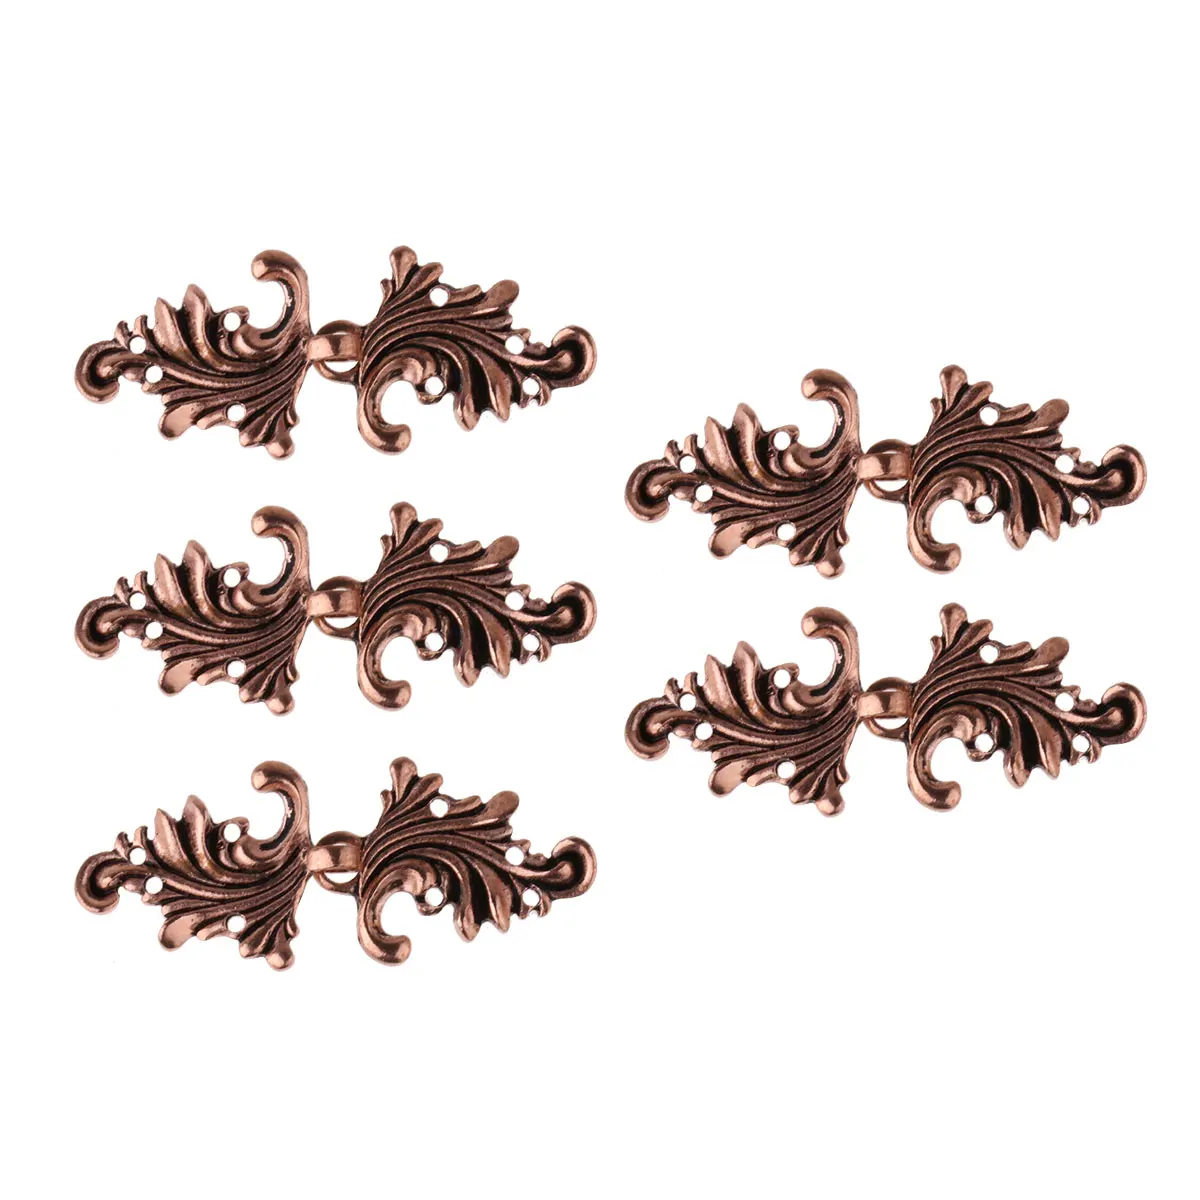 Bezelry 4 Pairs Asymmetric Acanthus Leaf Cape or Cloak Clasp Fasteners Gold Sew On Hooks and Eyes Cardigan Clip 66mm x 28mm Fastened 